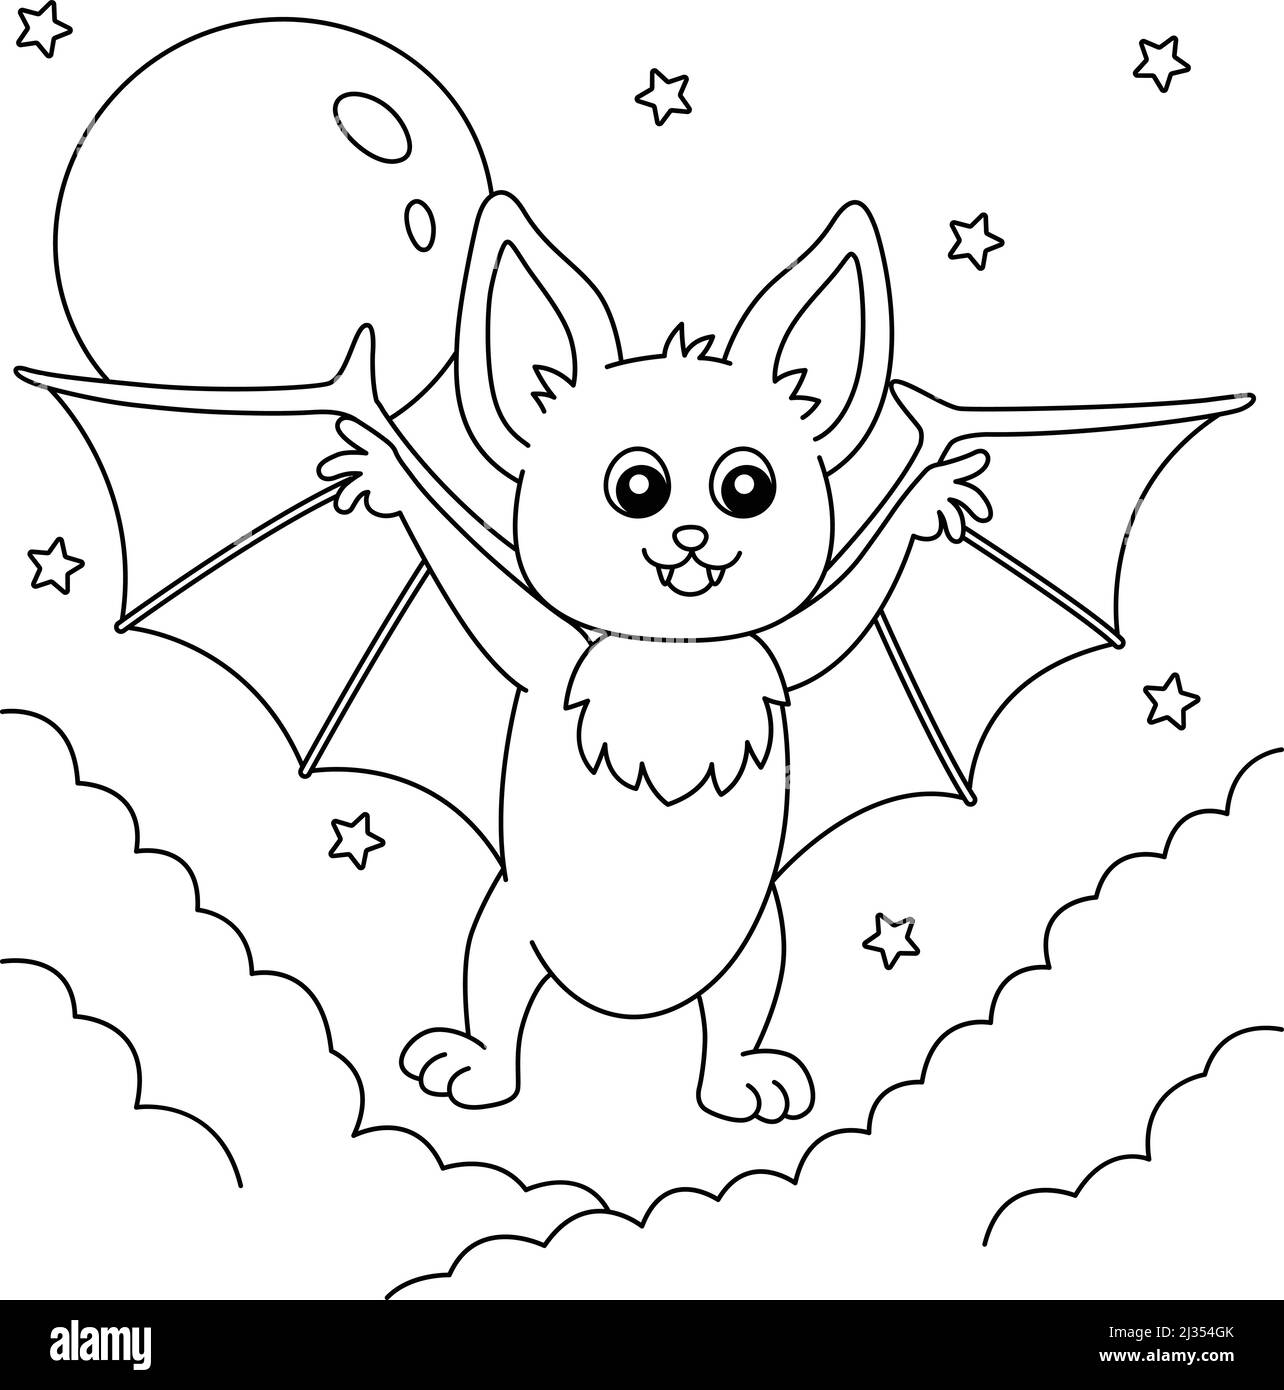 Bat Animal Coloring Page for Kids Stock Vector Image & Art - Alamy